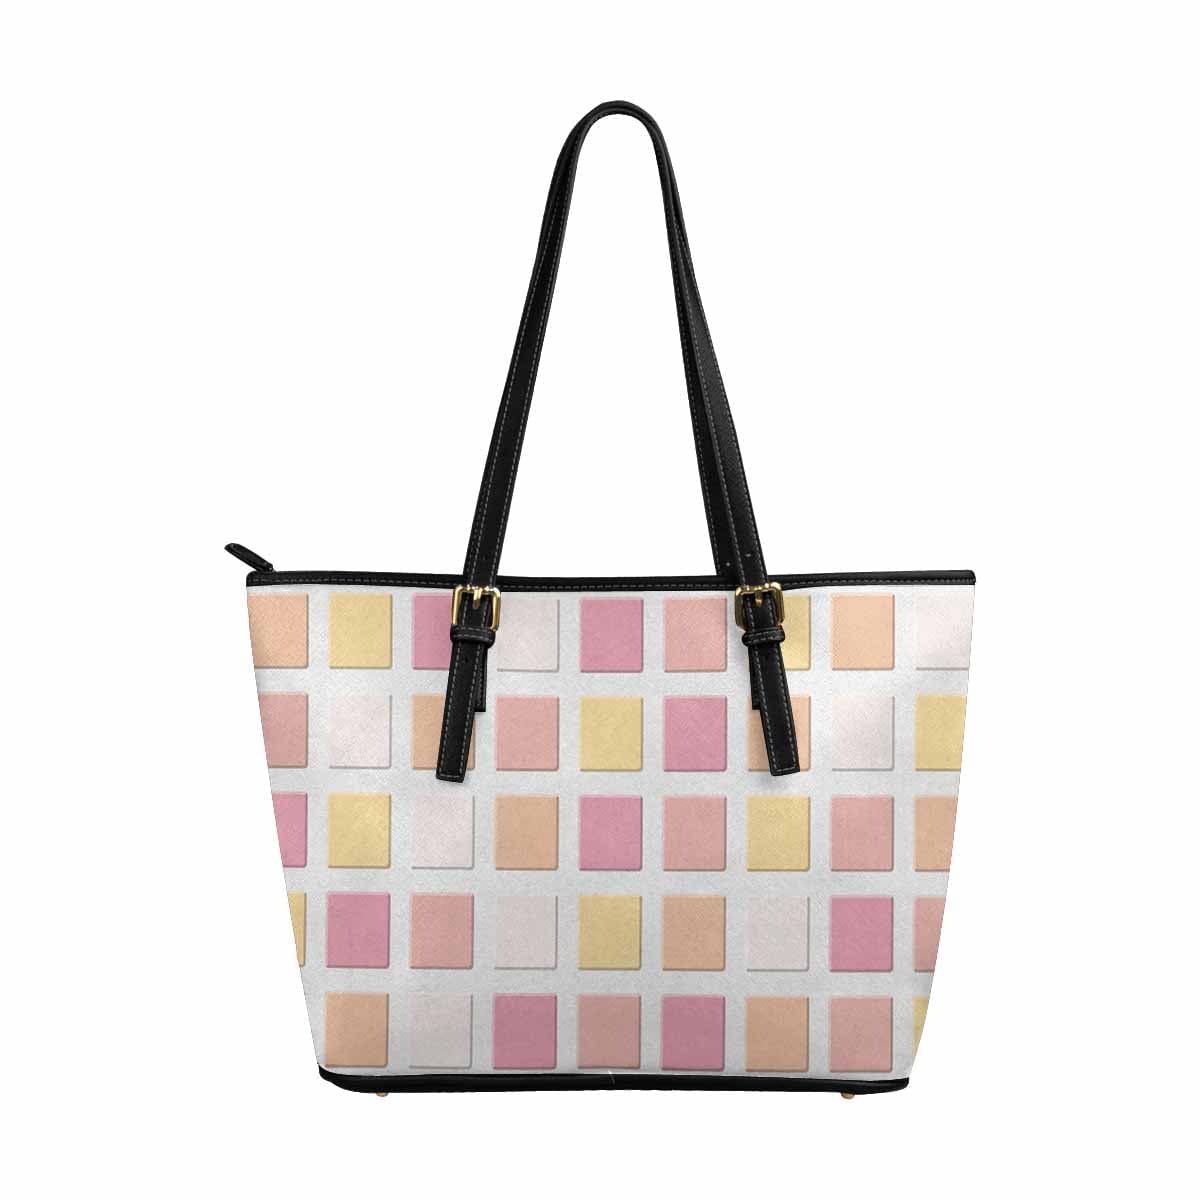 Large Leather Tote Shoulder Bag - Mosaic Tiles Pink - Bags | Leather Tote Bags